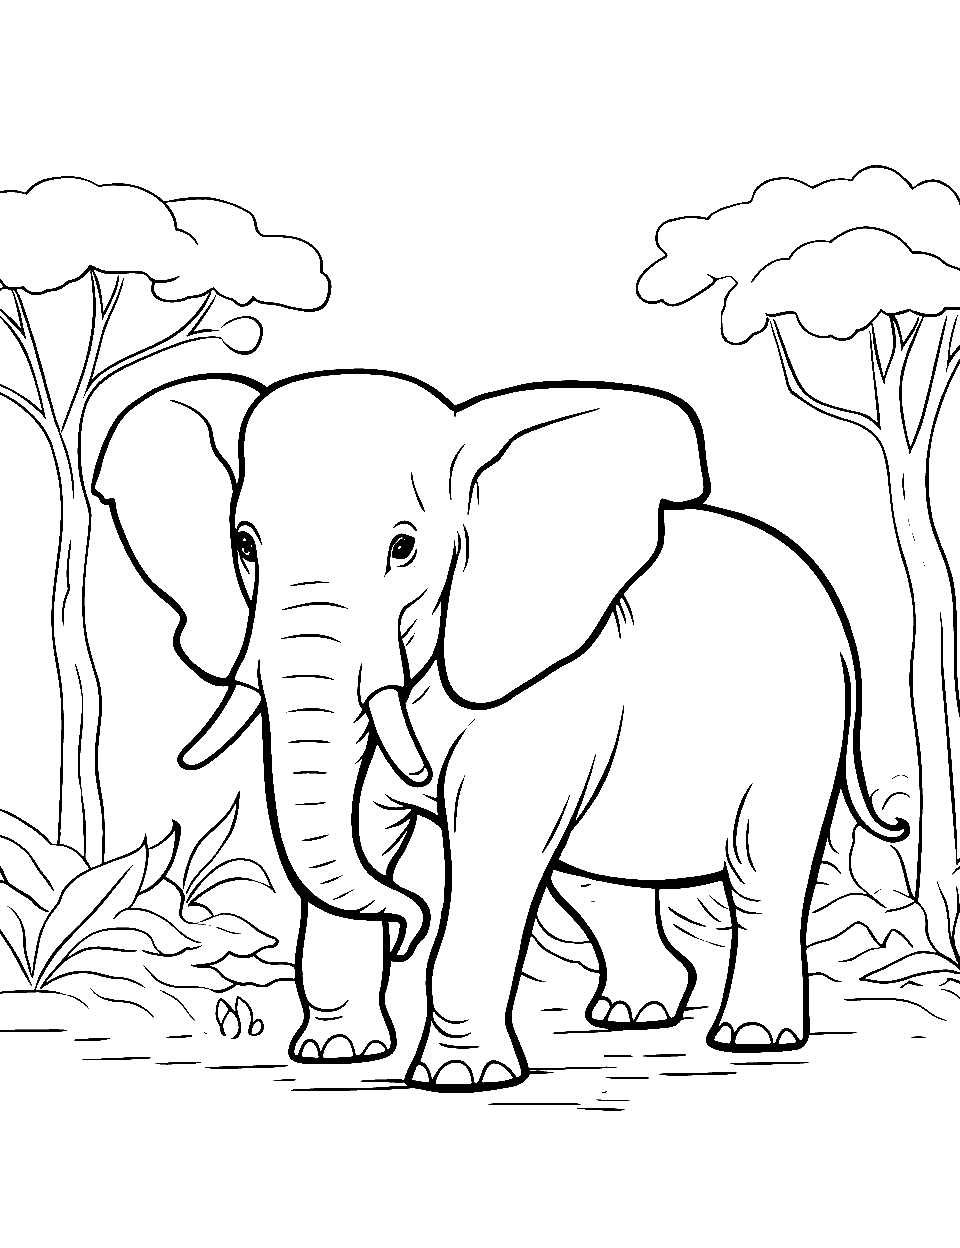 Lonely Forest Elephant Coloring Page - An easy-to-draw scene of an elephant standing among trees.